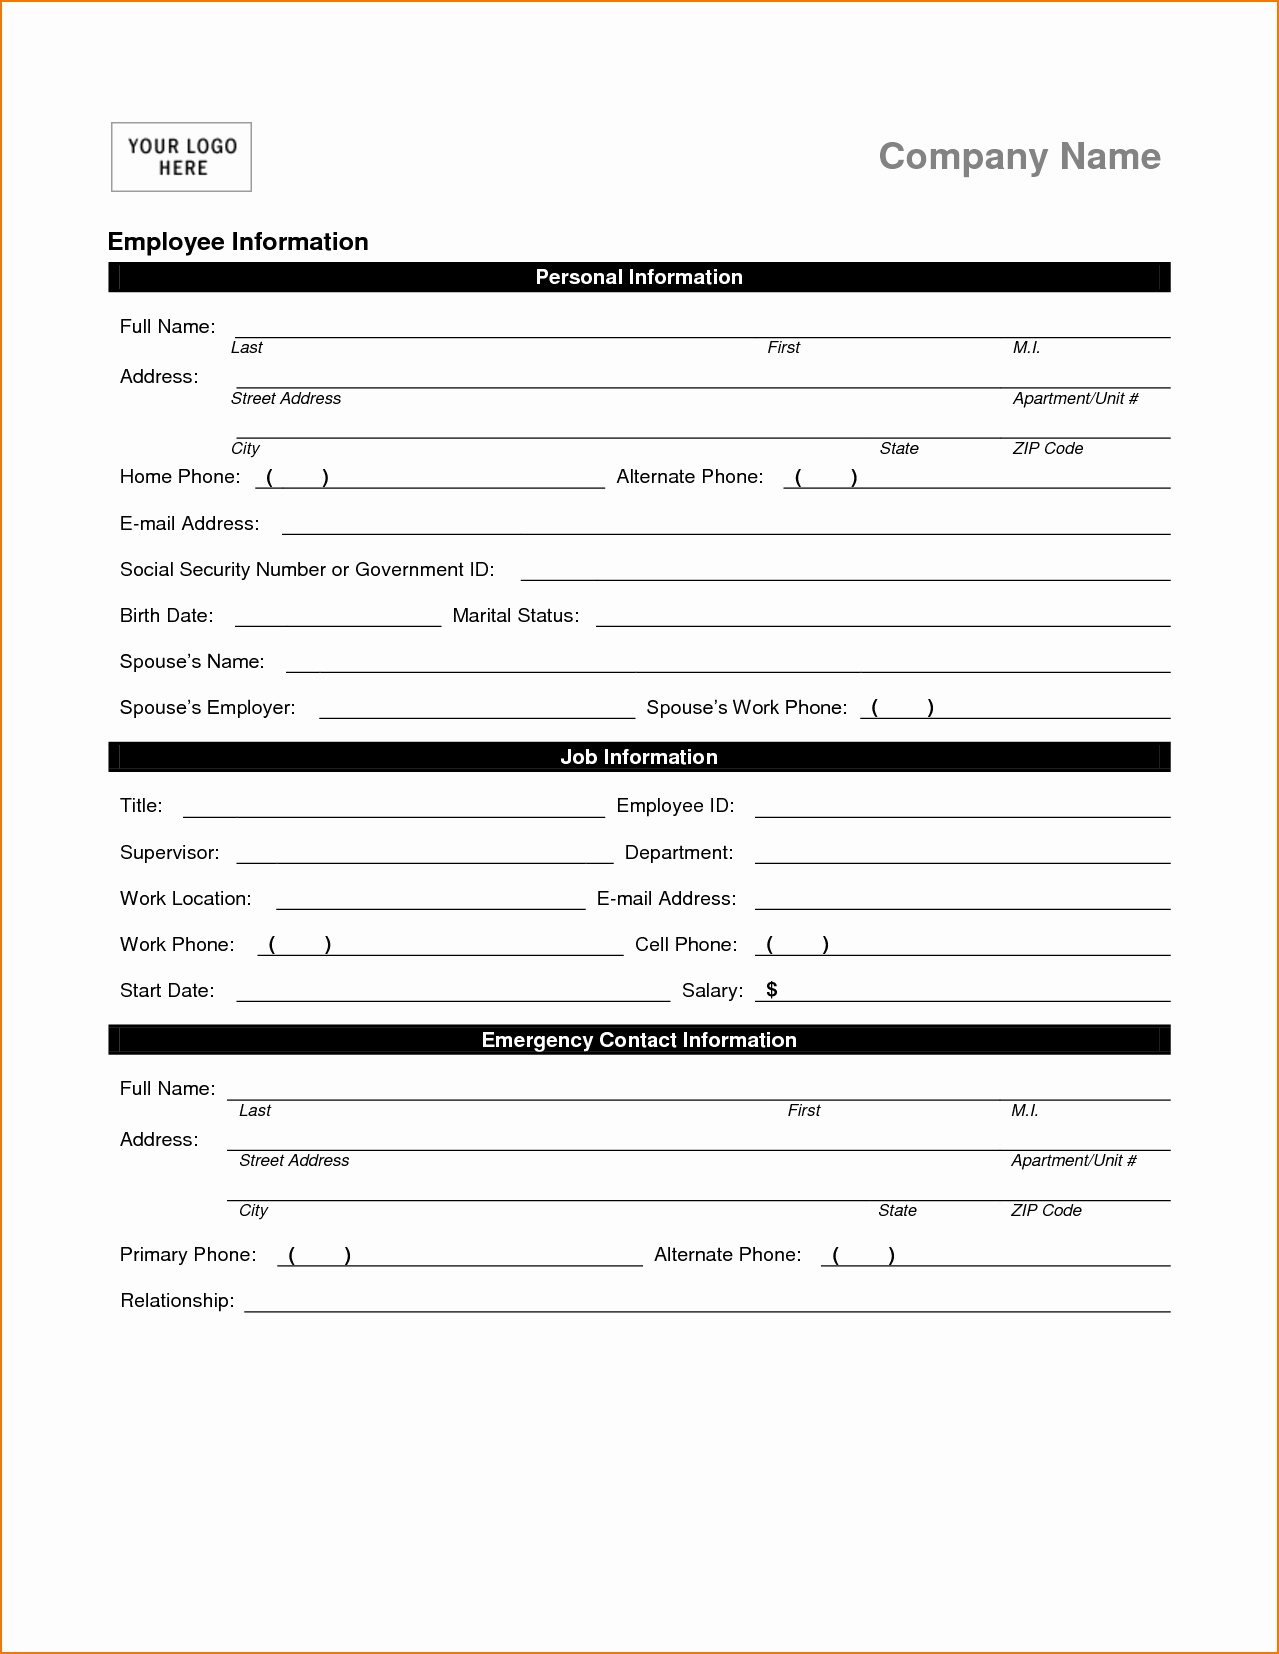 Employee Contact form Template Awesome 5 Information Sheet Template